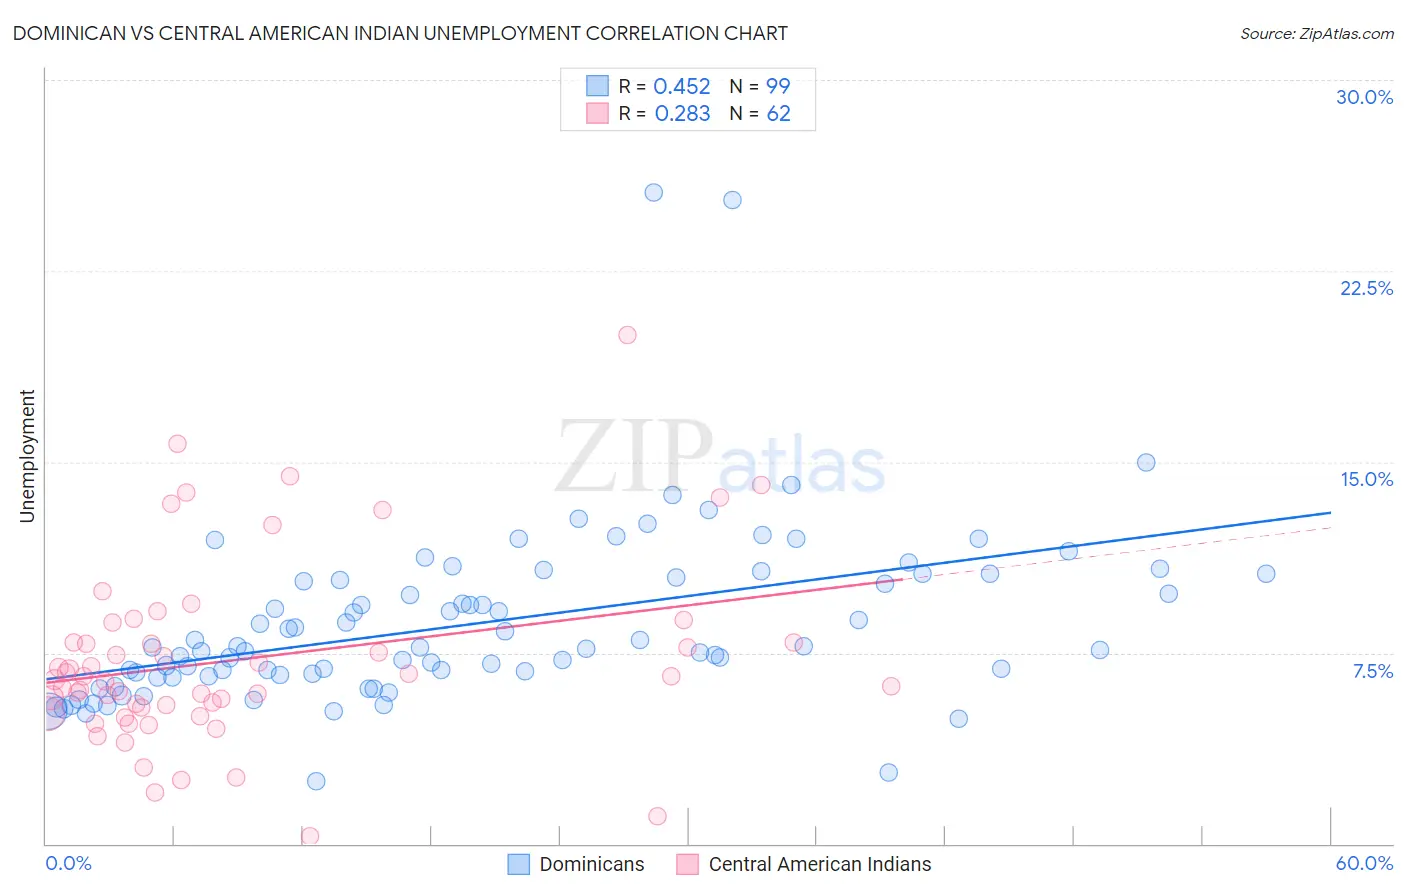 Dominican vs Central American Indian Unemployment